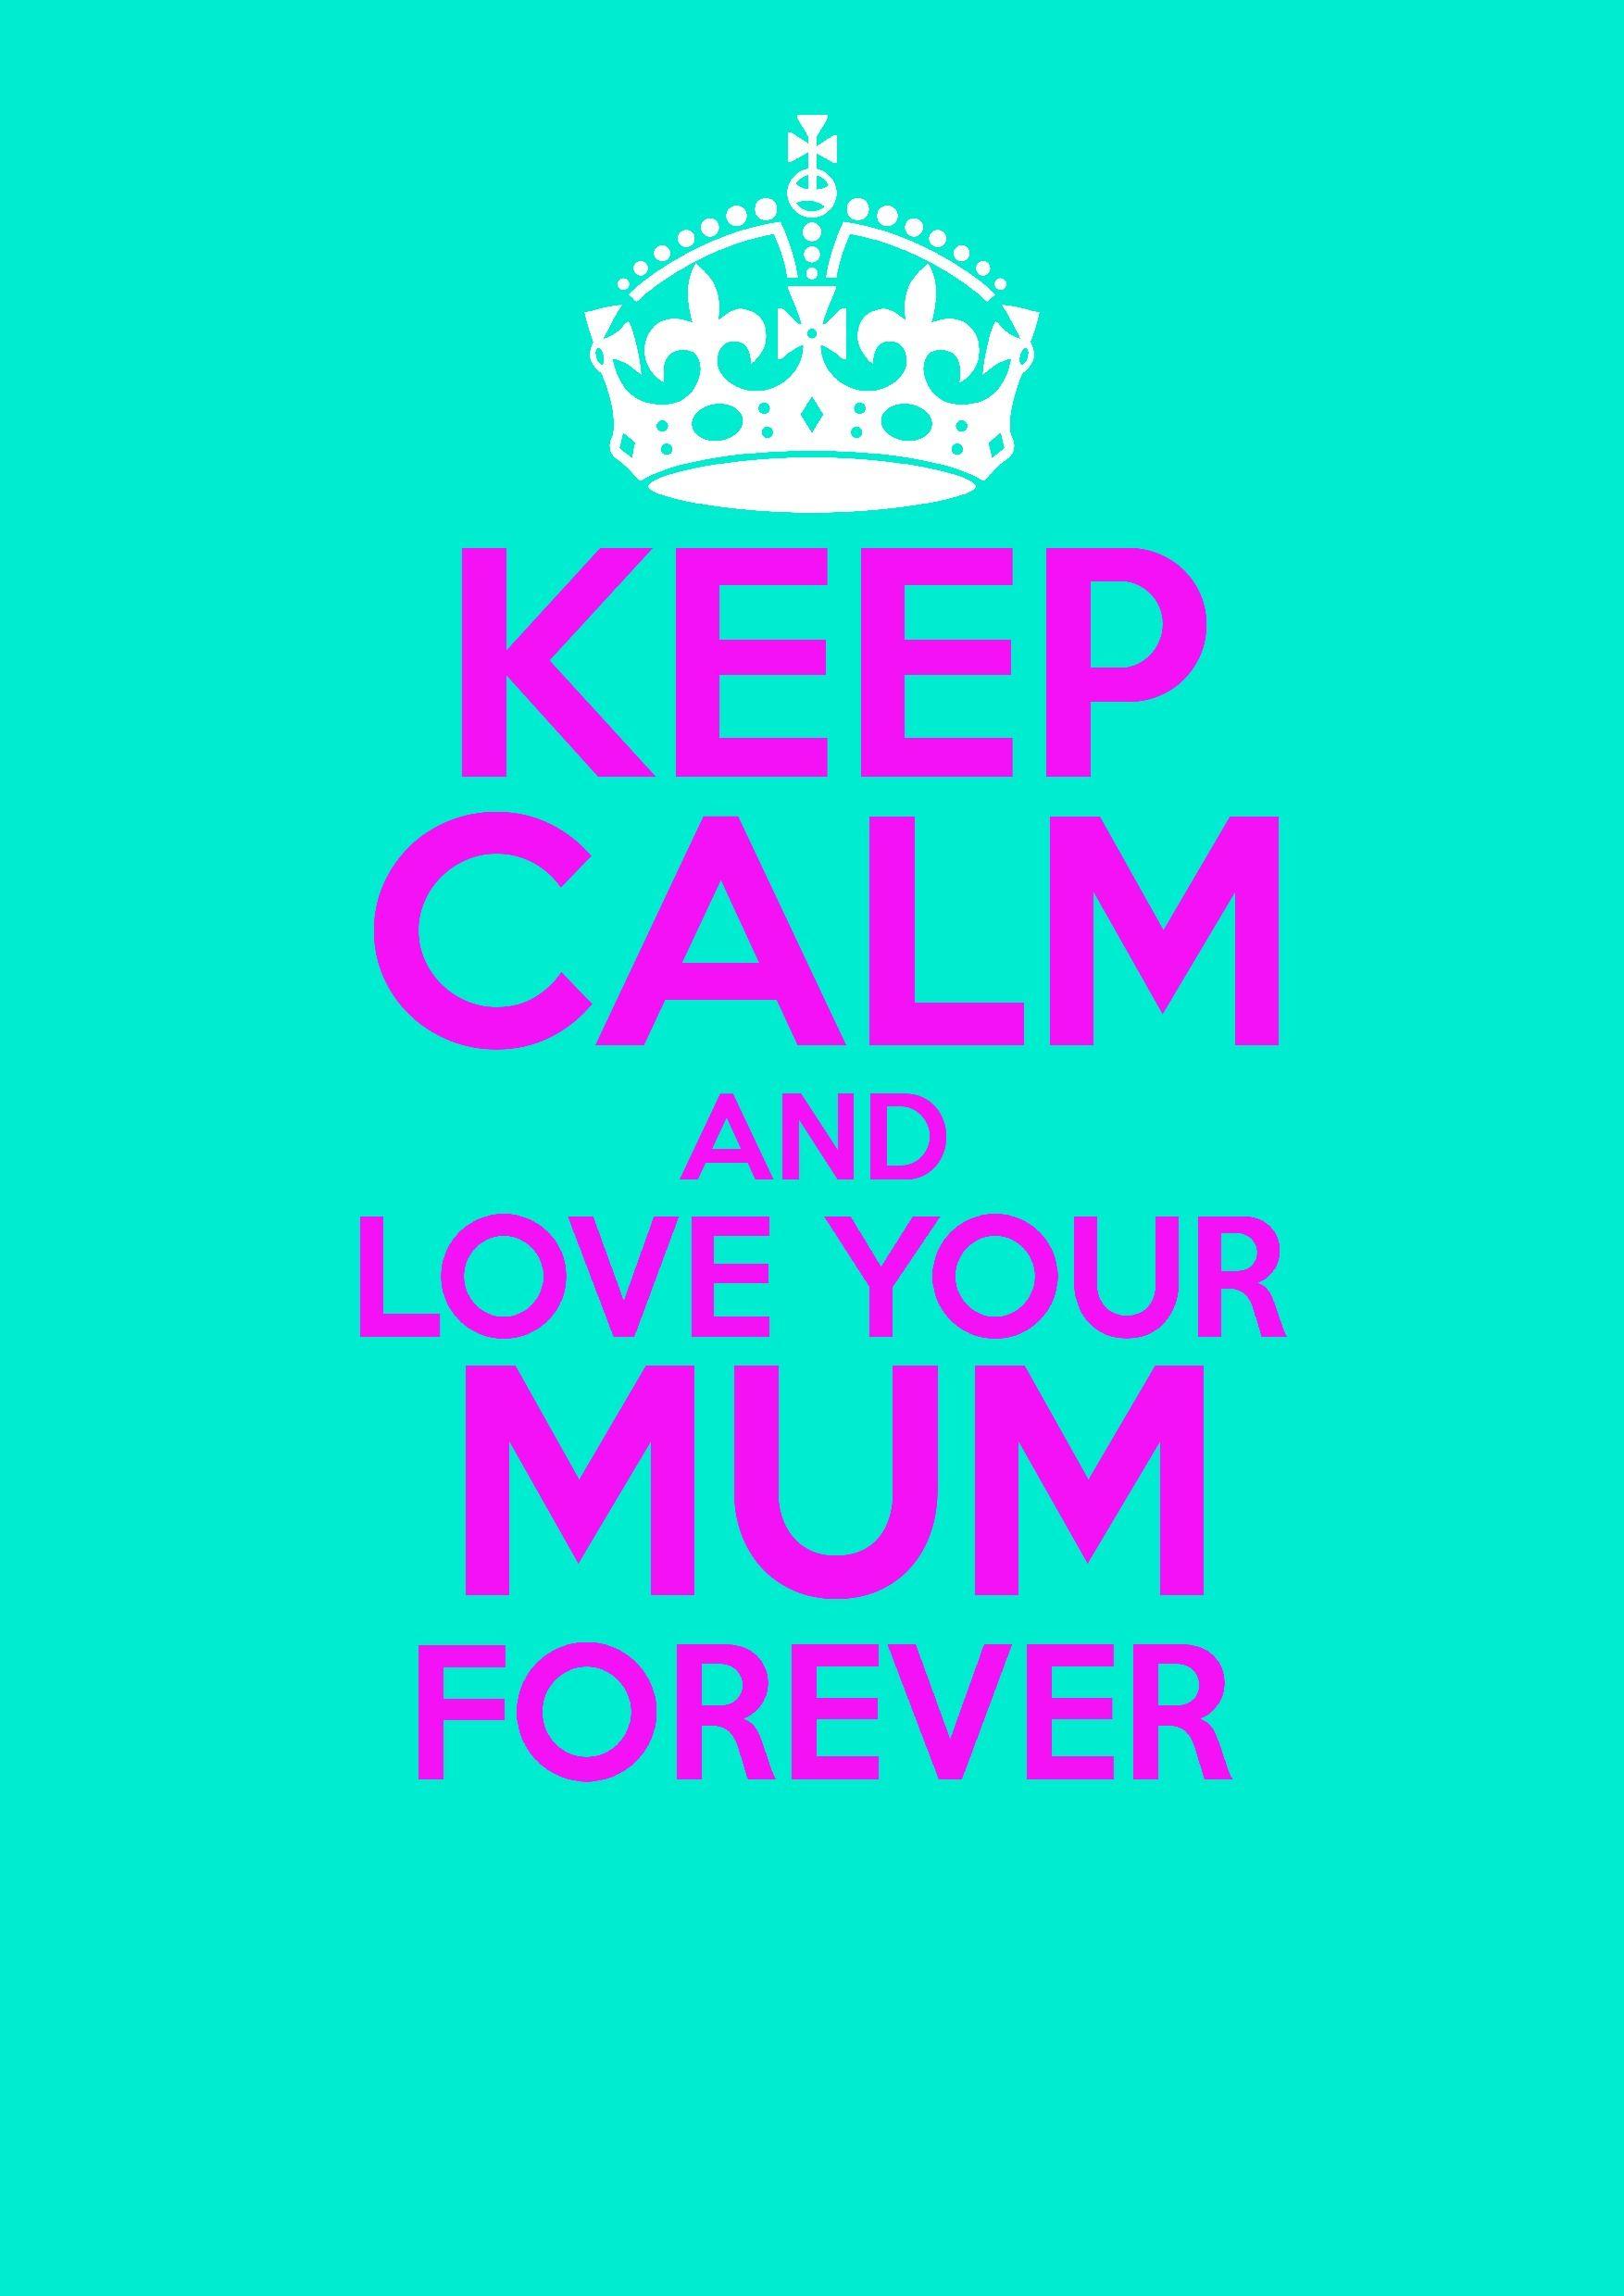 KeepCalm. KEEP CALM. Keep calm, Keep calm, love, Keep calm posters